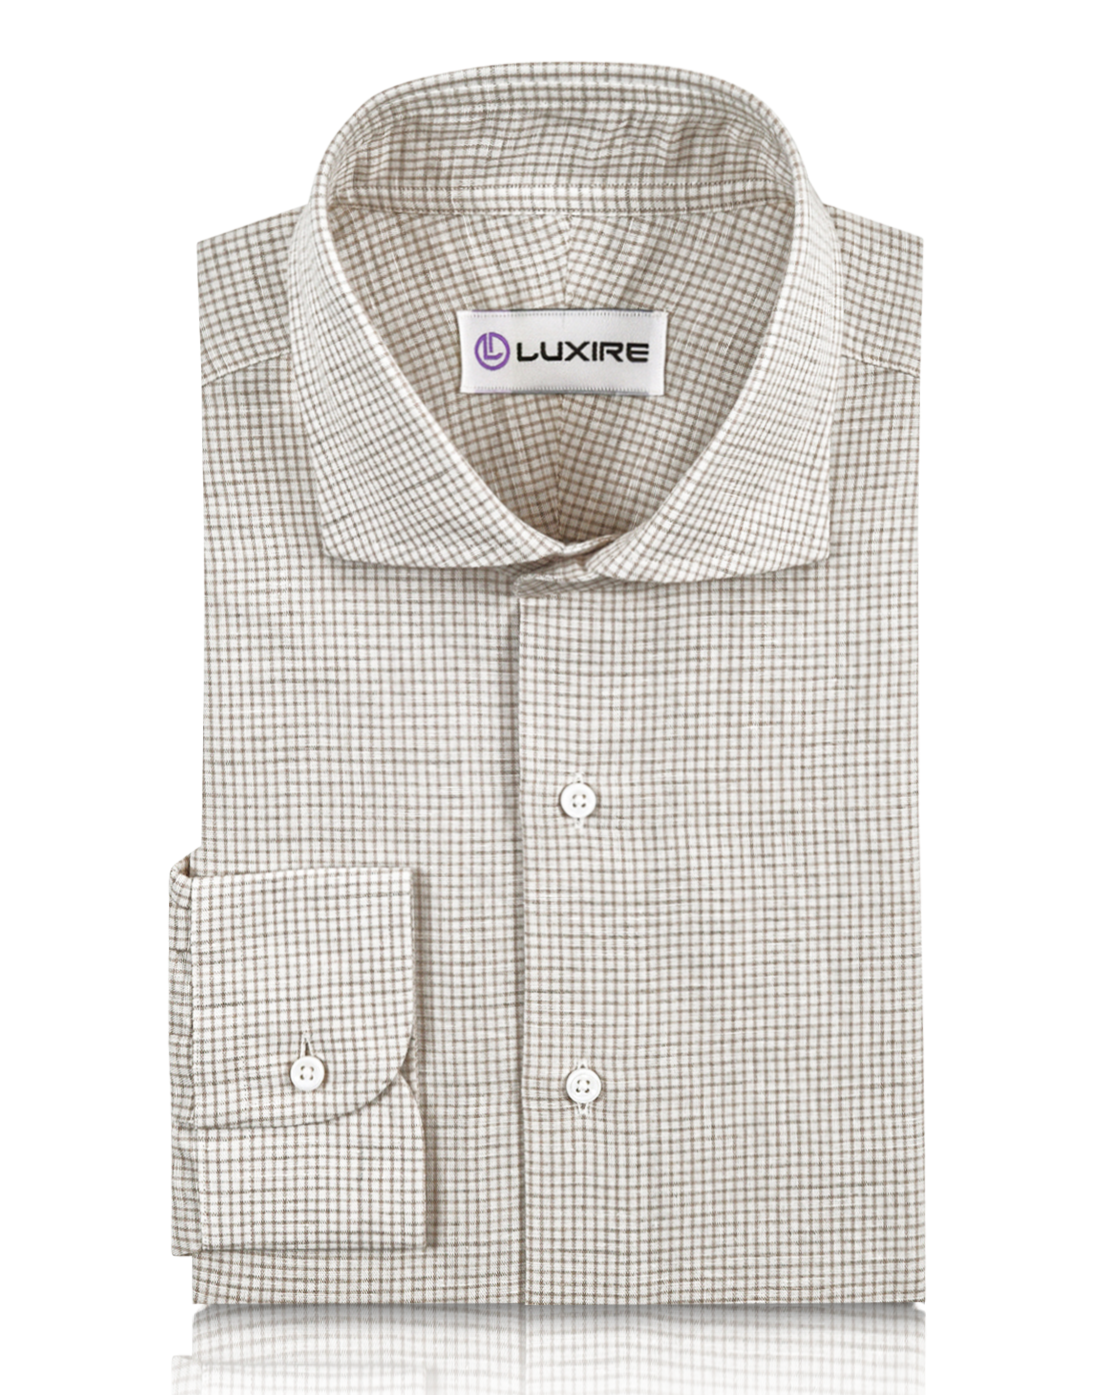 Front of the custom linen shirt for men in white with brown checks by Luxire Clothing